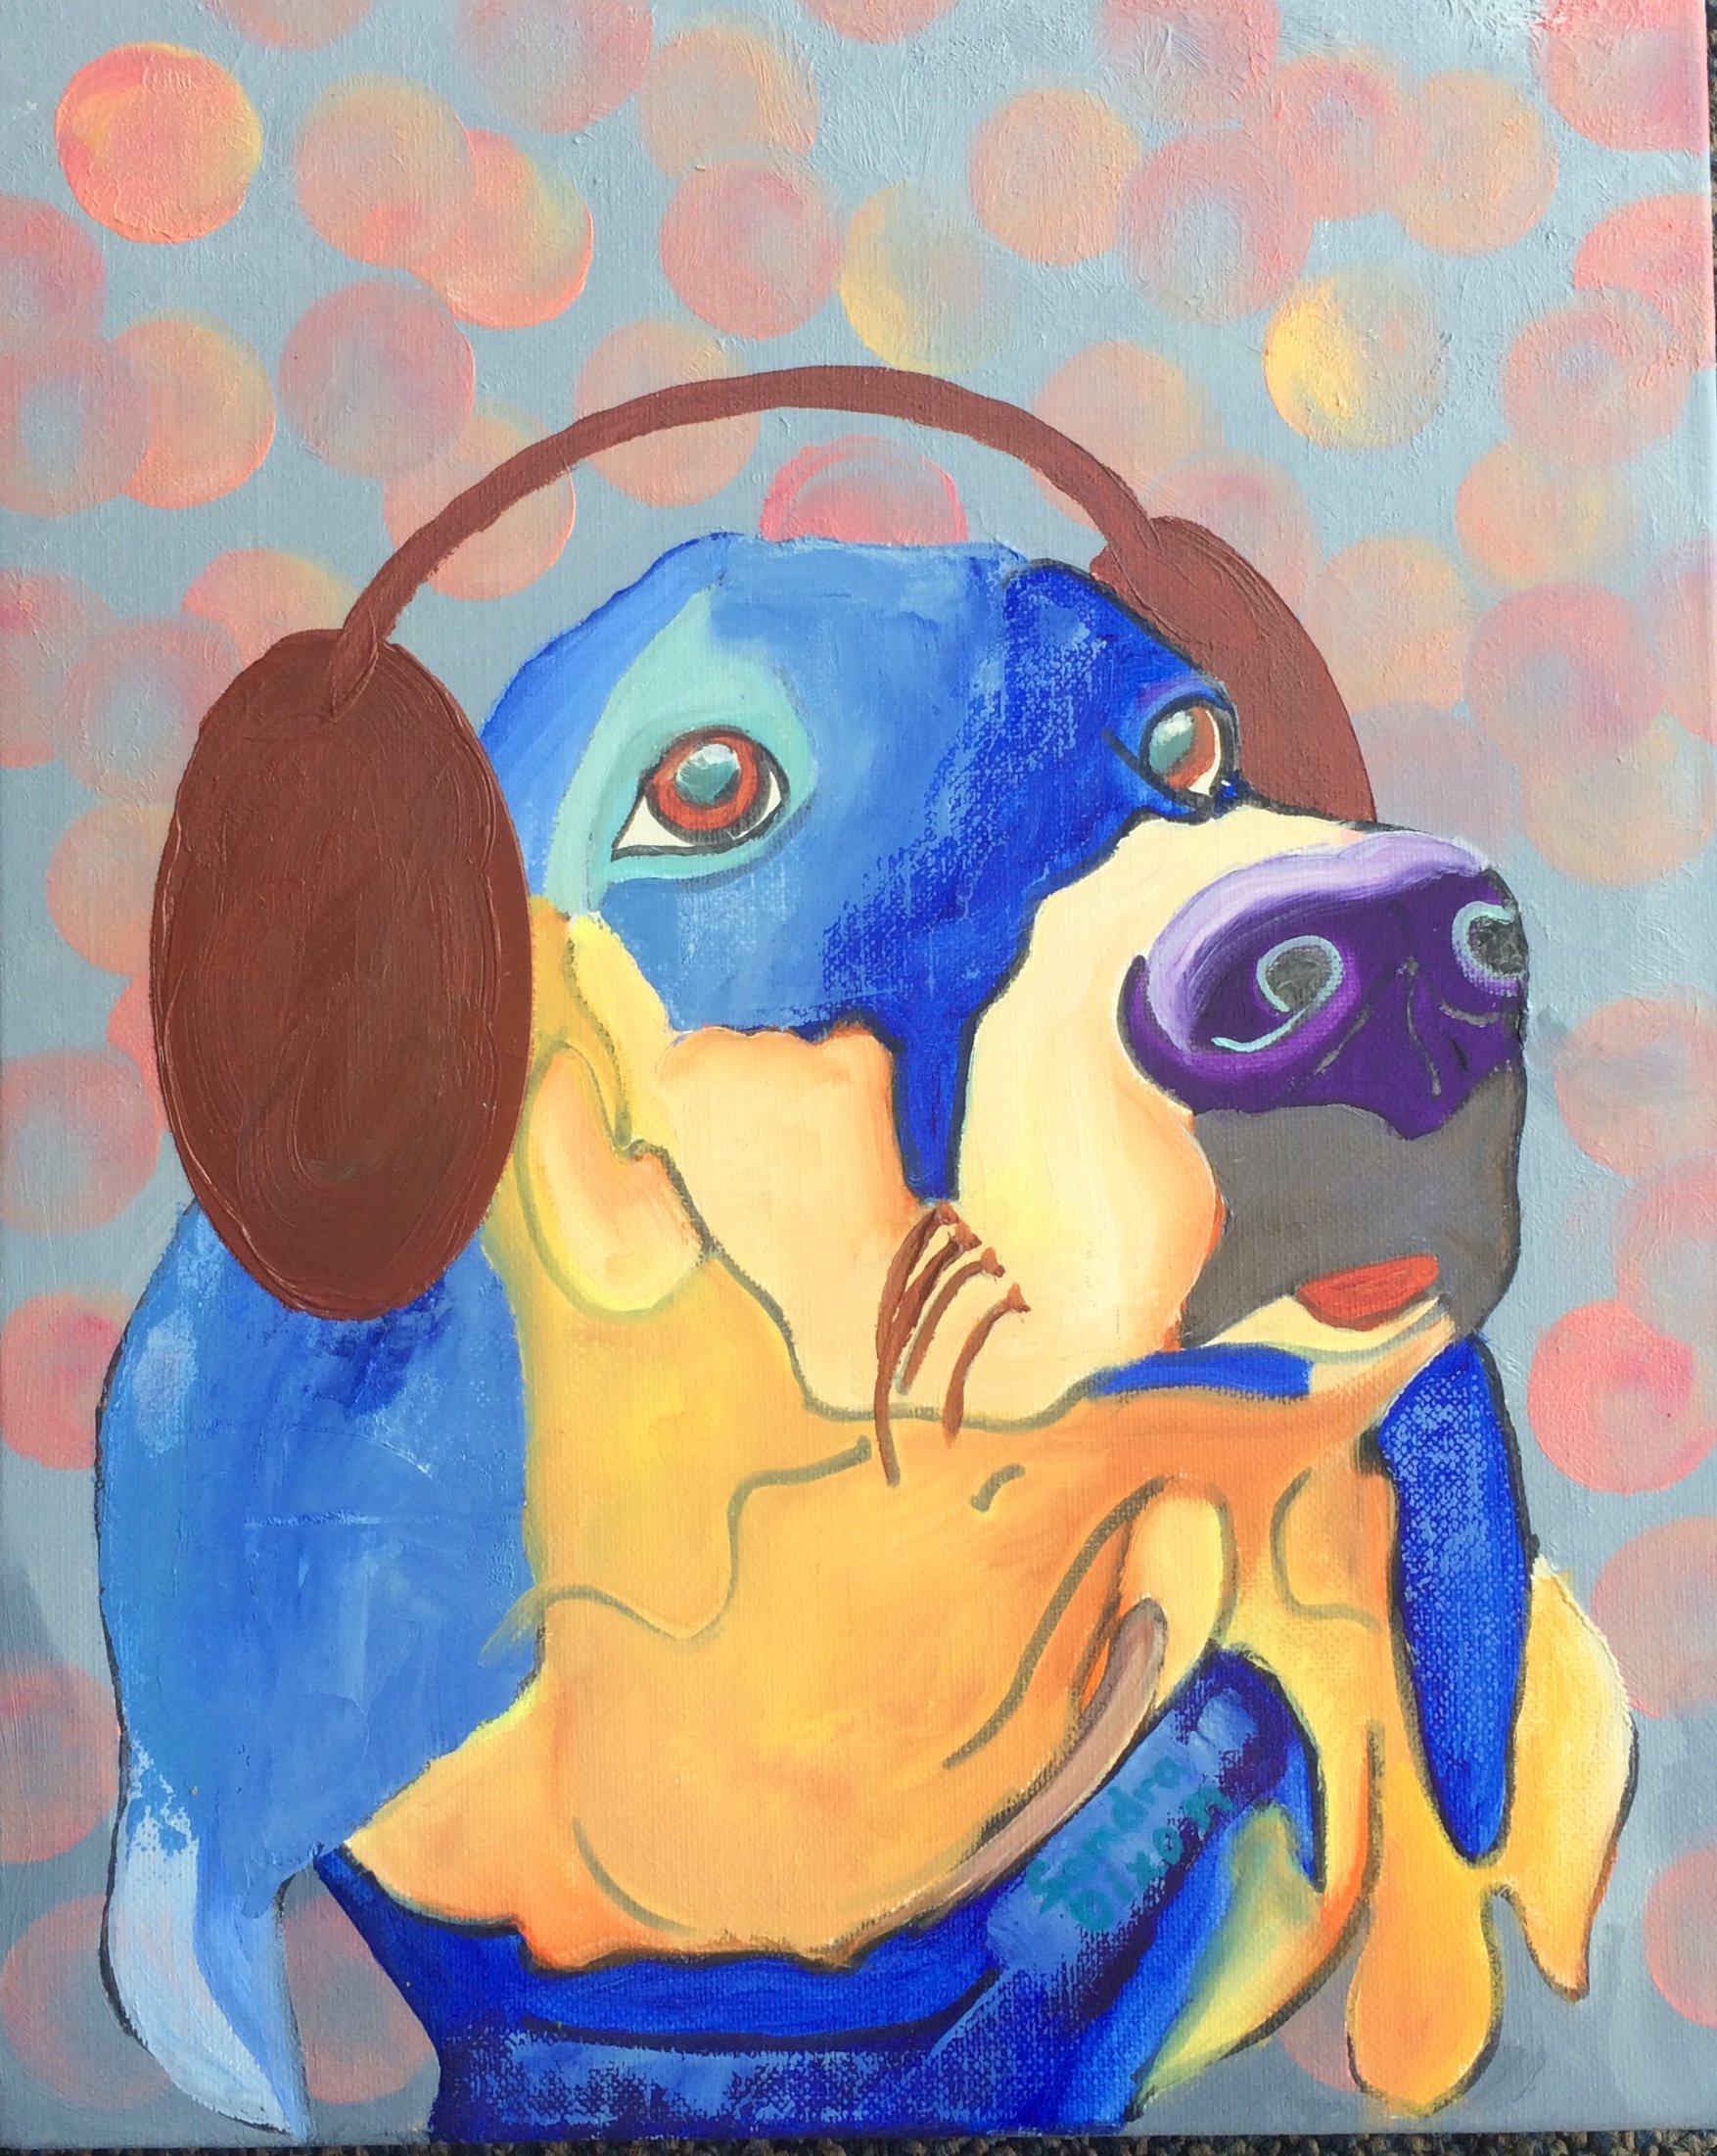 Sandra Dixon painting of dog - with permission from artist